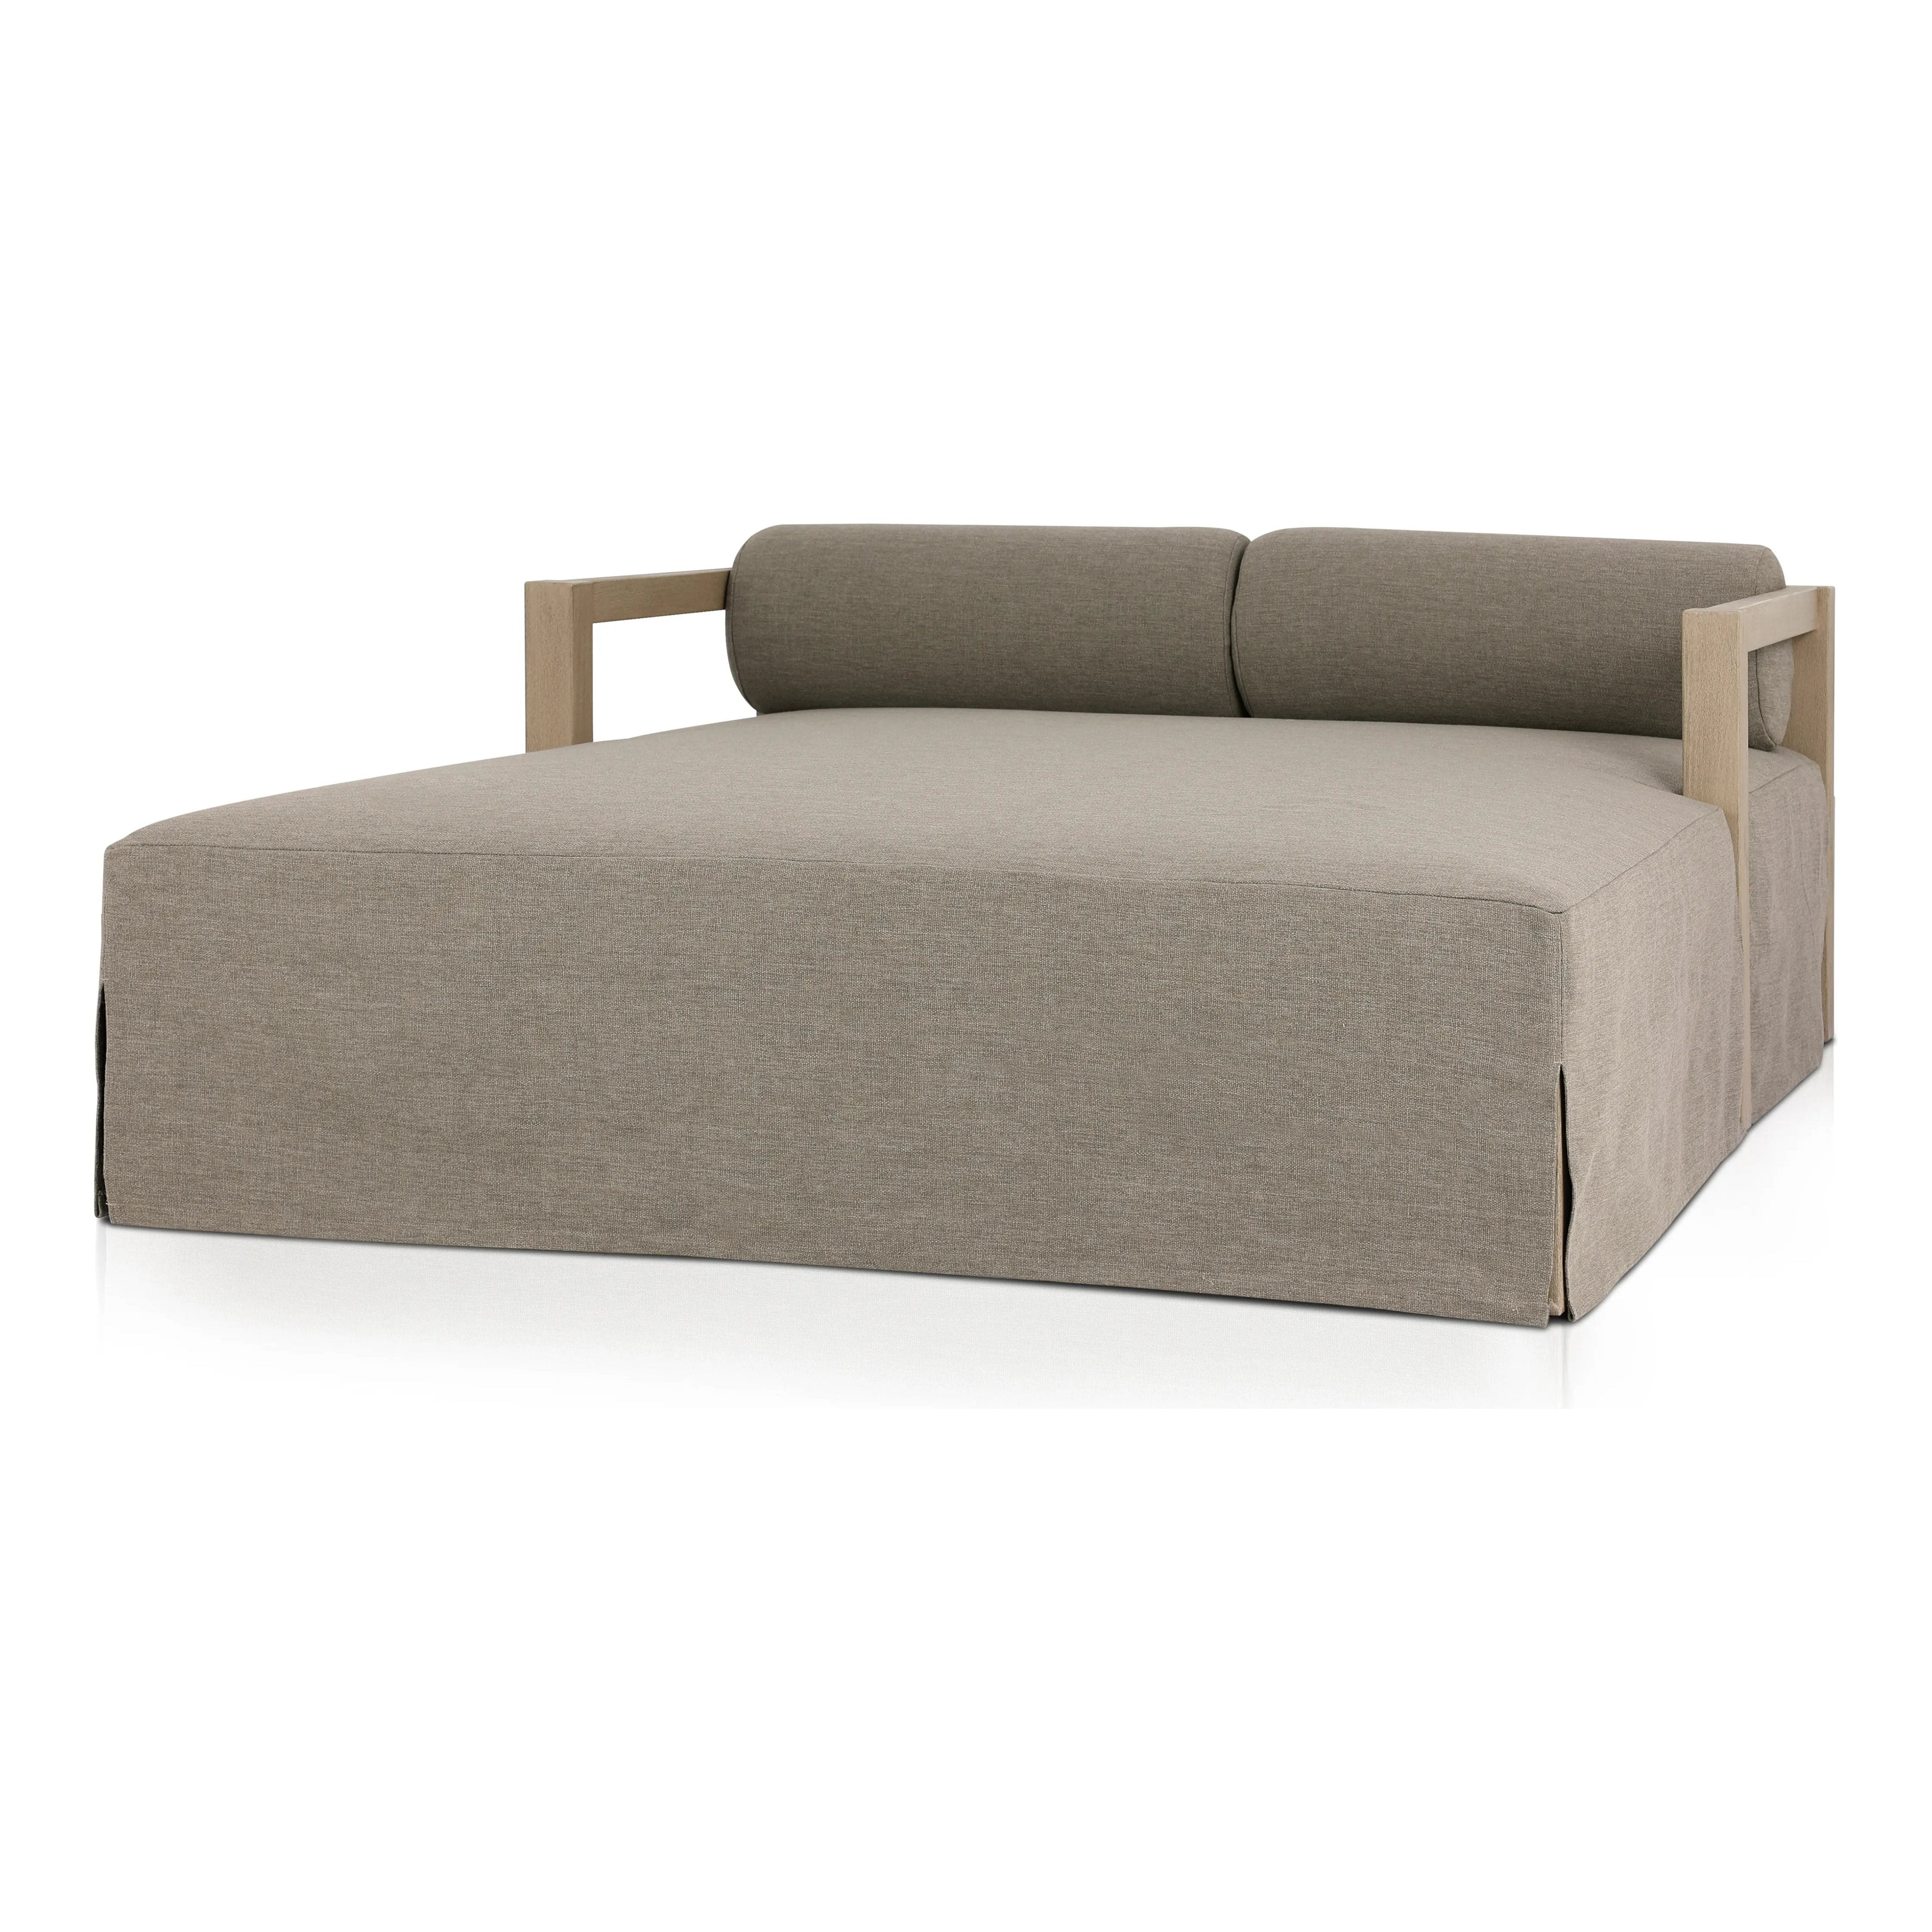 A soft, durable slipcover brings a complementary casual and laid-back look to structured framing of FSCÂ®-certified teak. A bolster back cushion offers support and comfort in this outdoor daybed. Made in Italy, this sustainably made fabric is antimicrobial and highly resistant to sunlight, abrasion and chlorine. Amethyst Home provides interior design, new home construction design consulting, vintage area rugs, and lighting in the Alpharetta metro area.